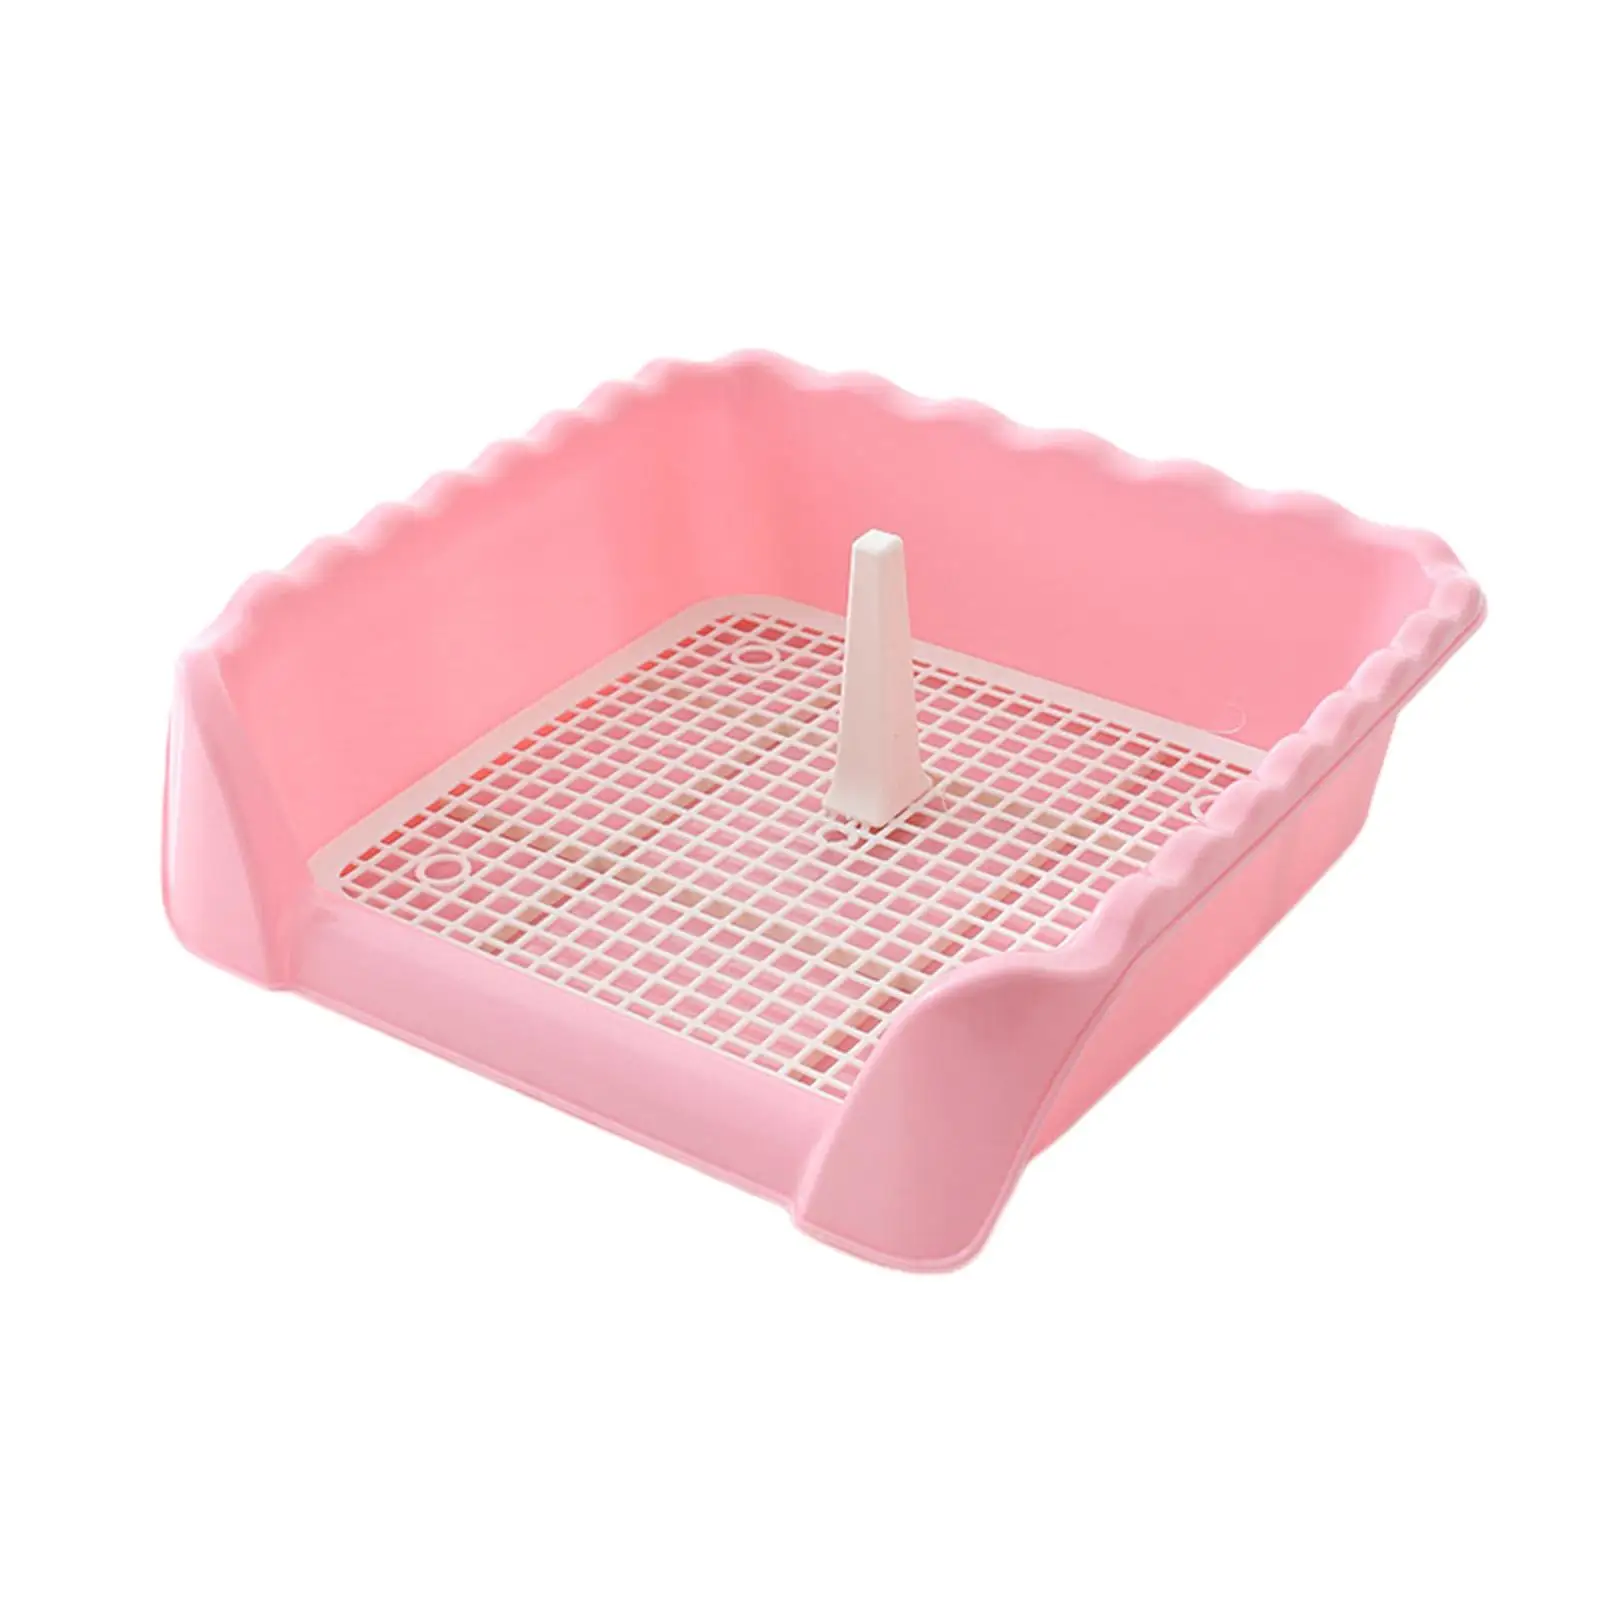 Indoor Dog Potty Tray with Protection keep Floors Clean Non Slip Dog Toilet for Training Litter Box Hamster Puppy Hedgehog